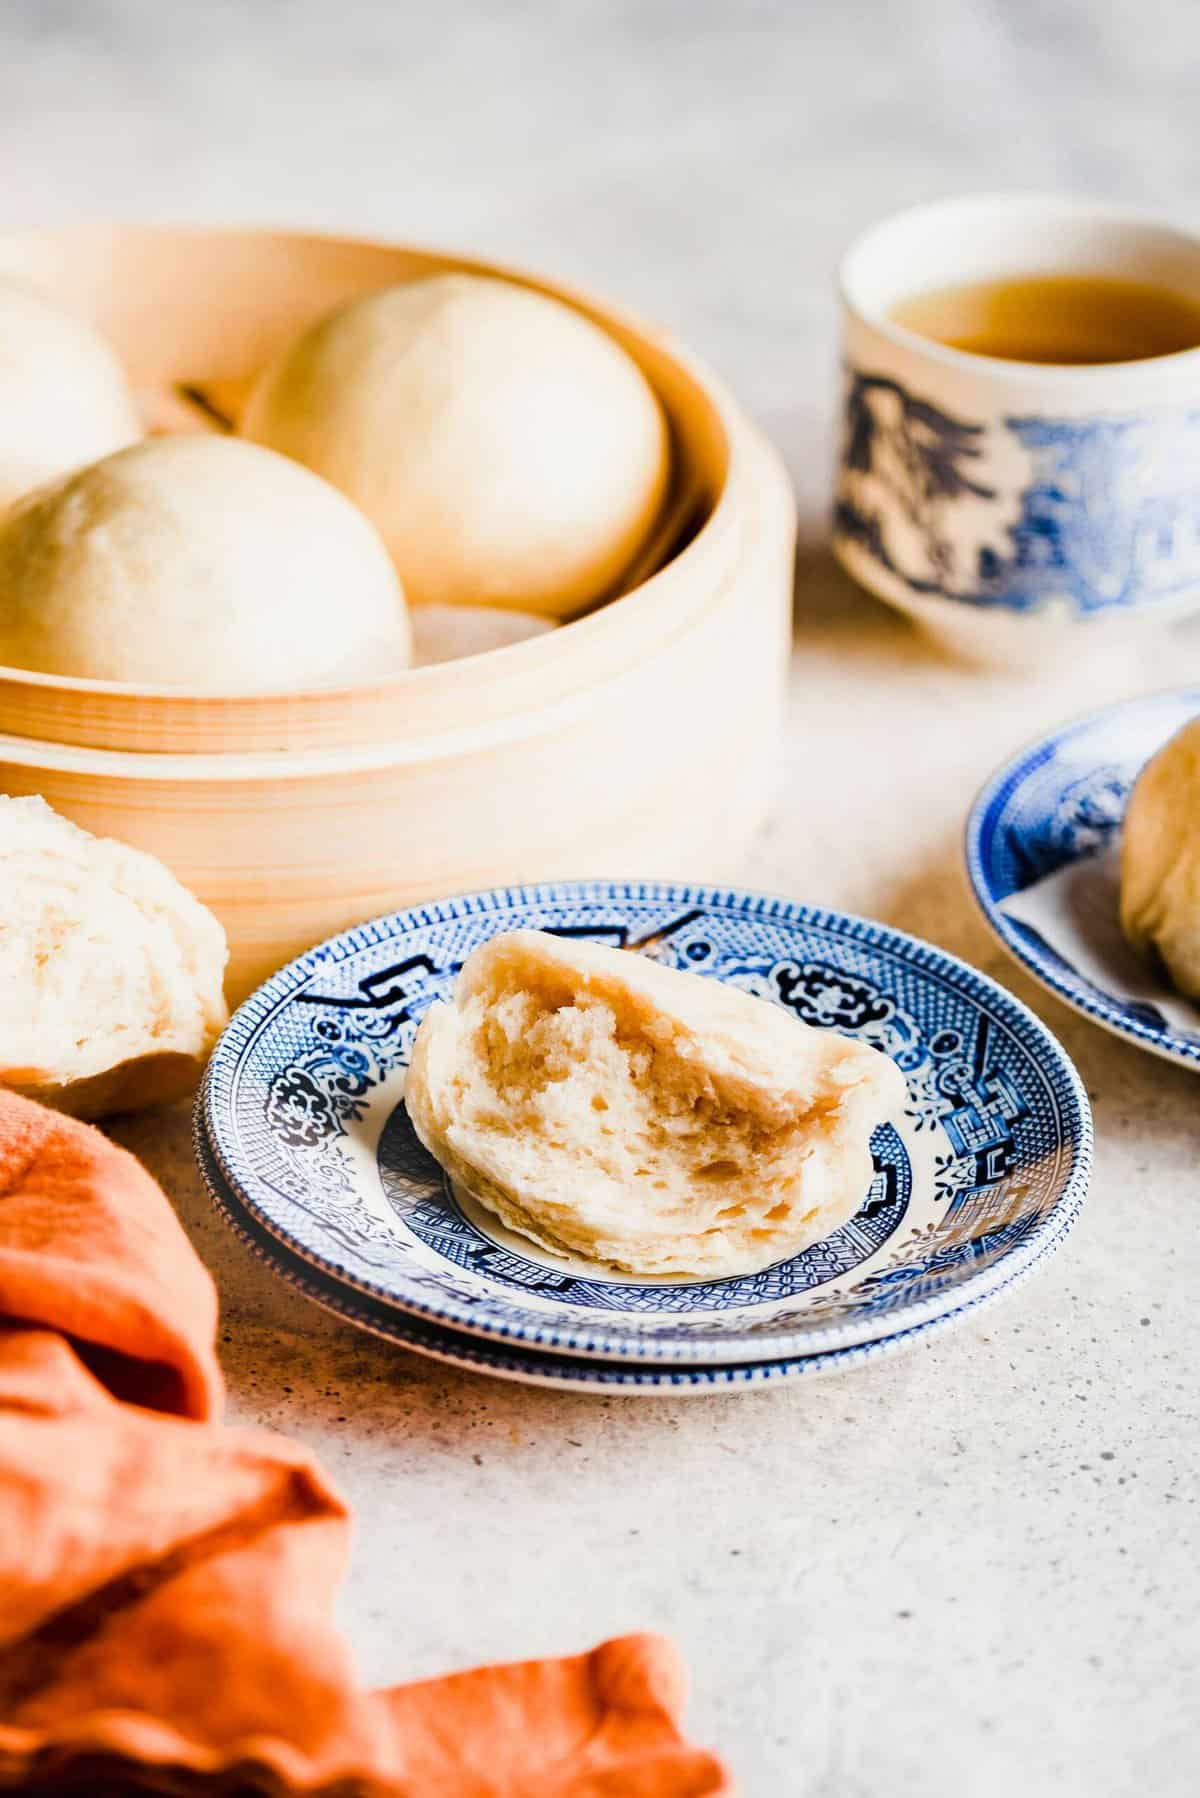 Half of a Chinese steamed bun on a plate, next to another plate, with a steamer full of buns and a cup of tea in the background